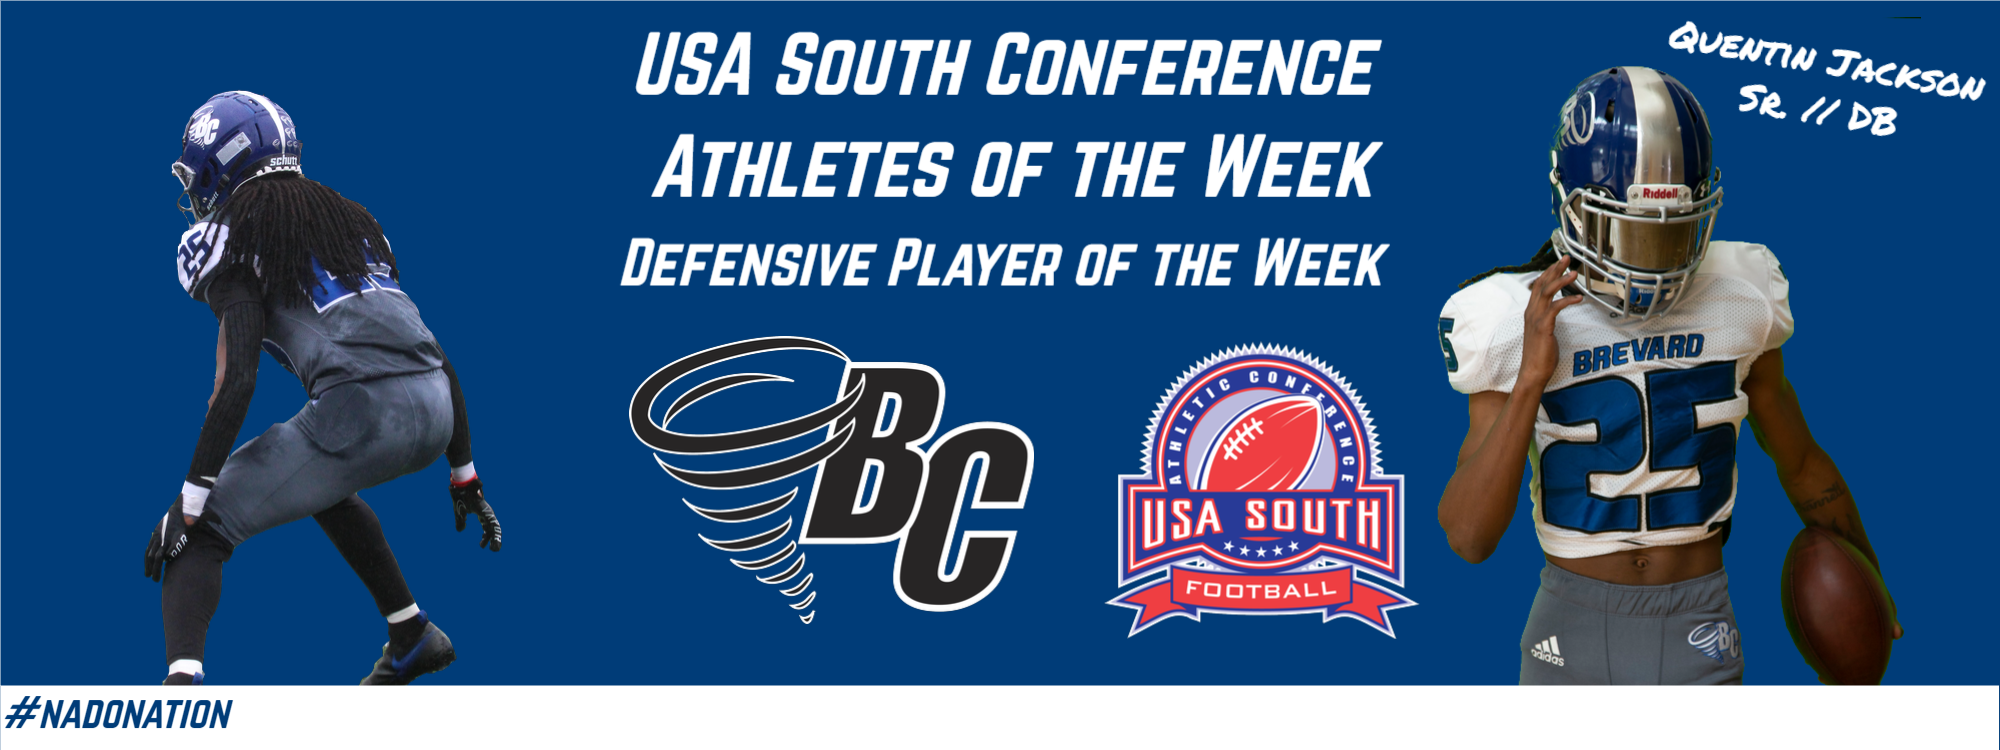 Jackson Picked as USA South’s Defensive Player of the Week